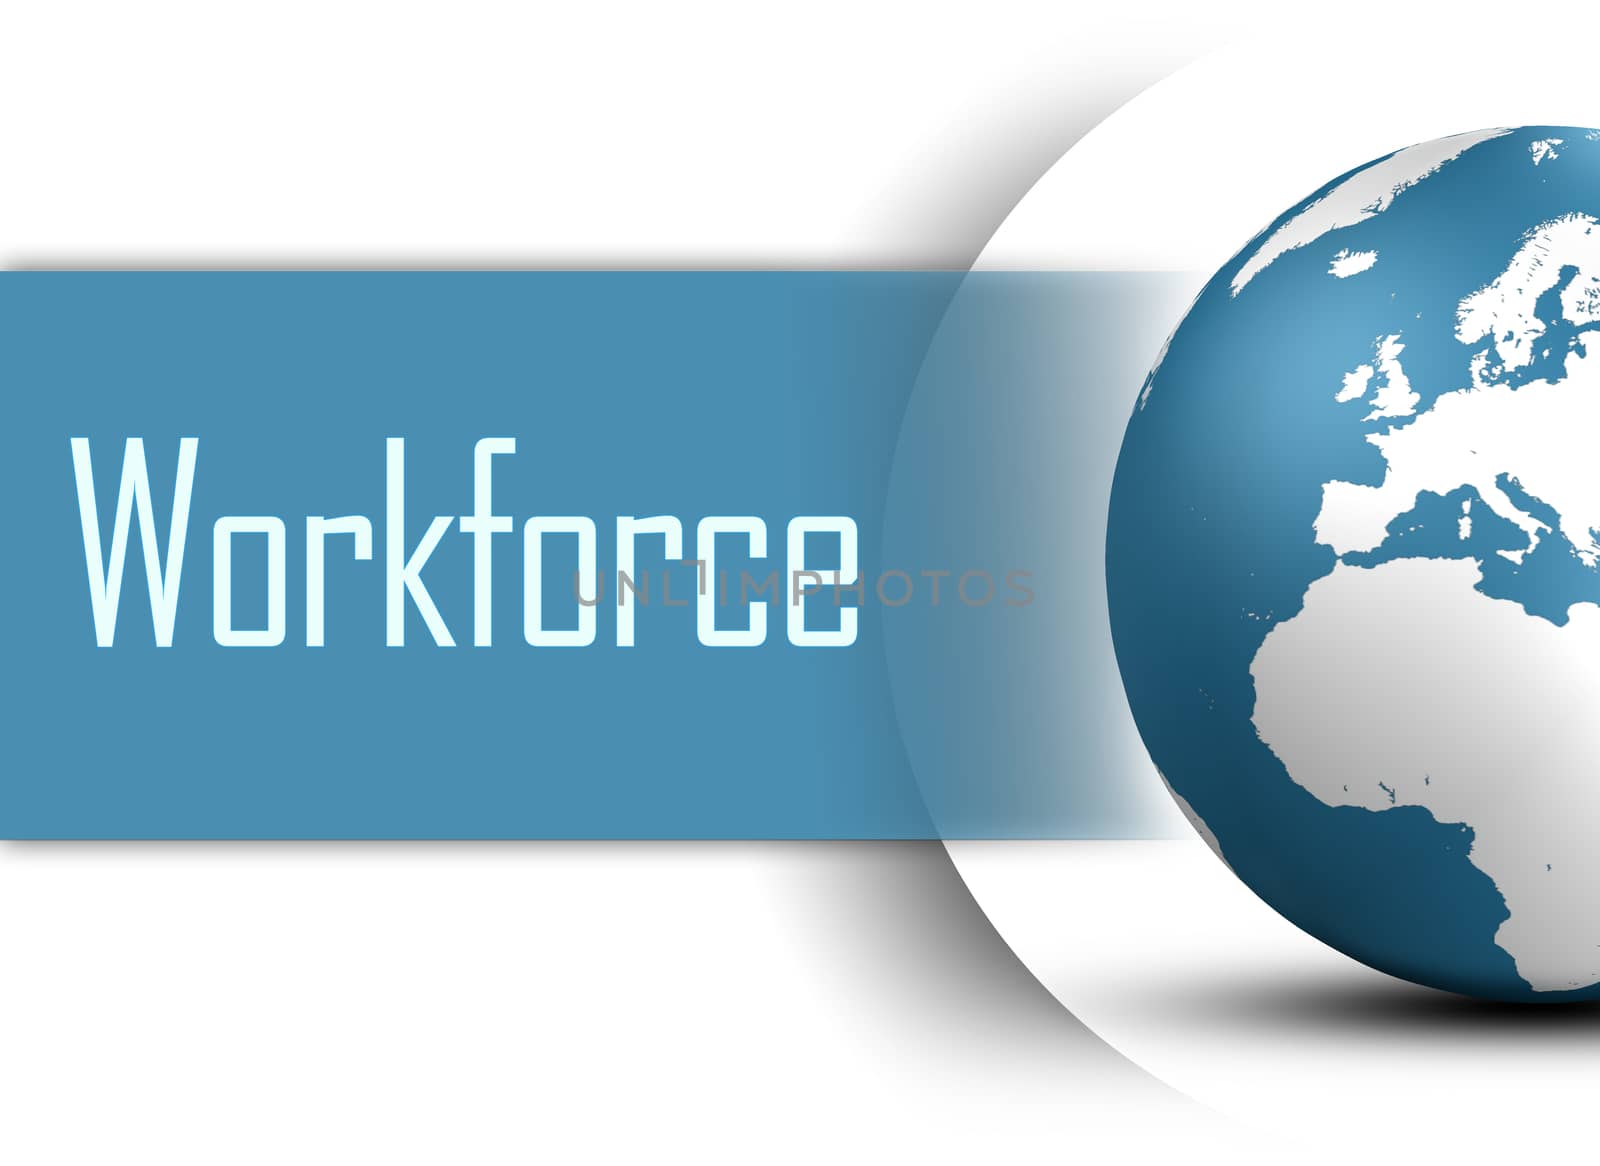 Workforce concept with globe on white background